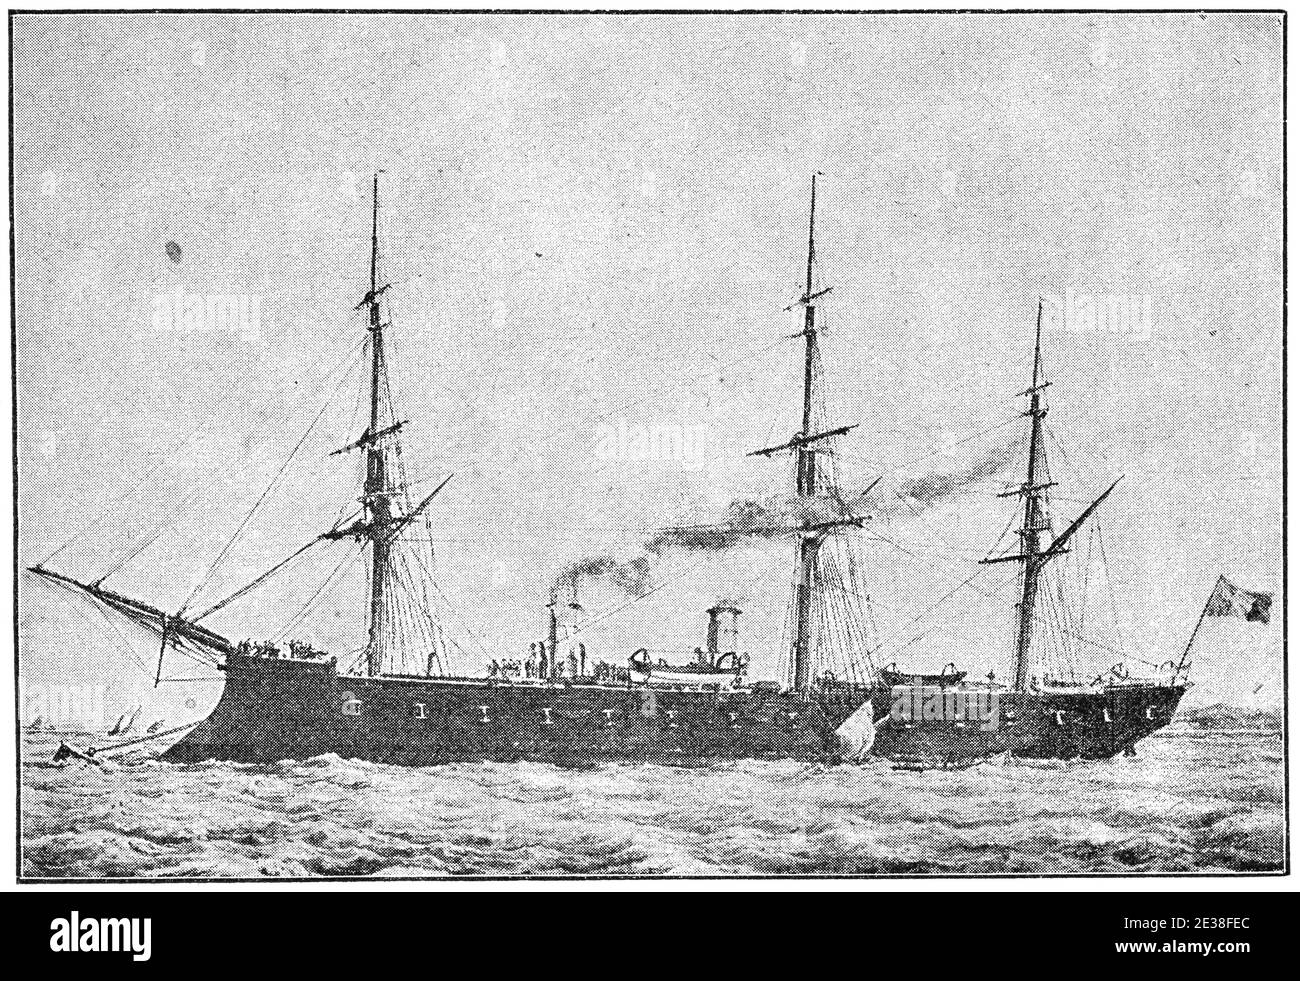 Le Tourville (1874) - a broadside ironclad of French Navy. Illustration of the 19th century. Germany. White background. Stock Photo